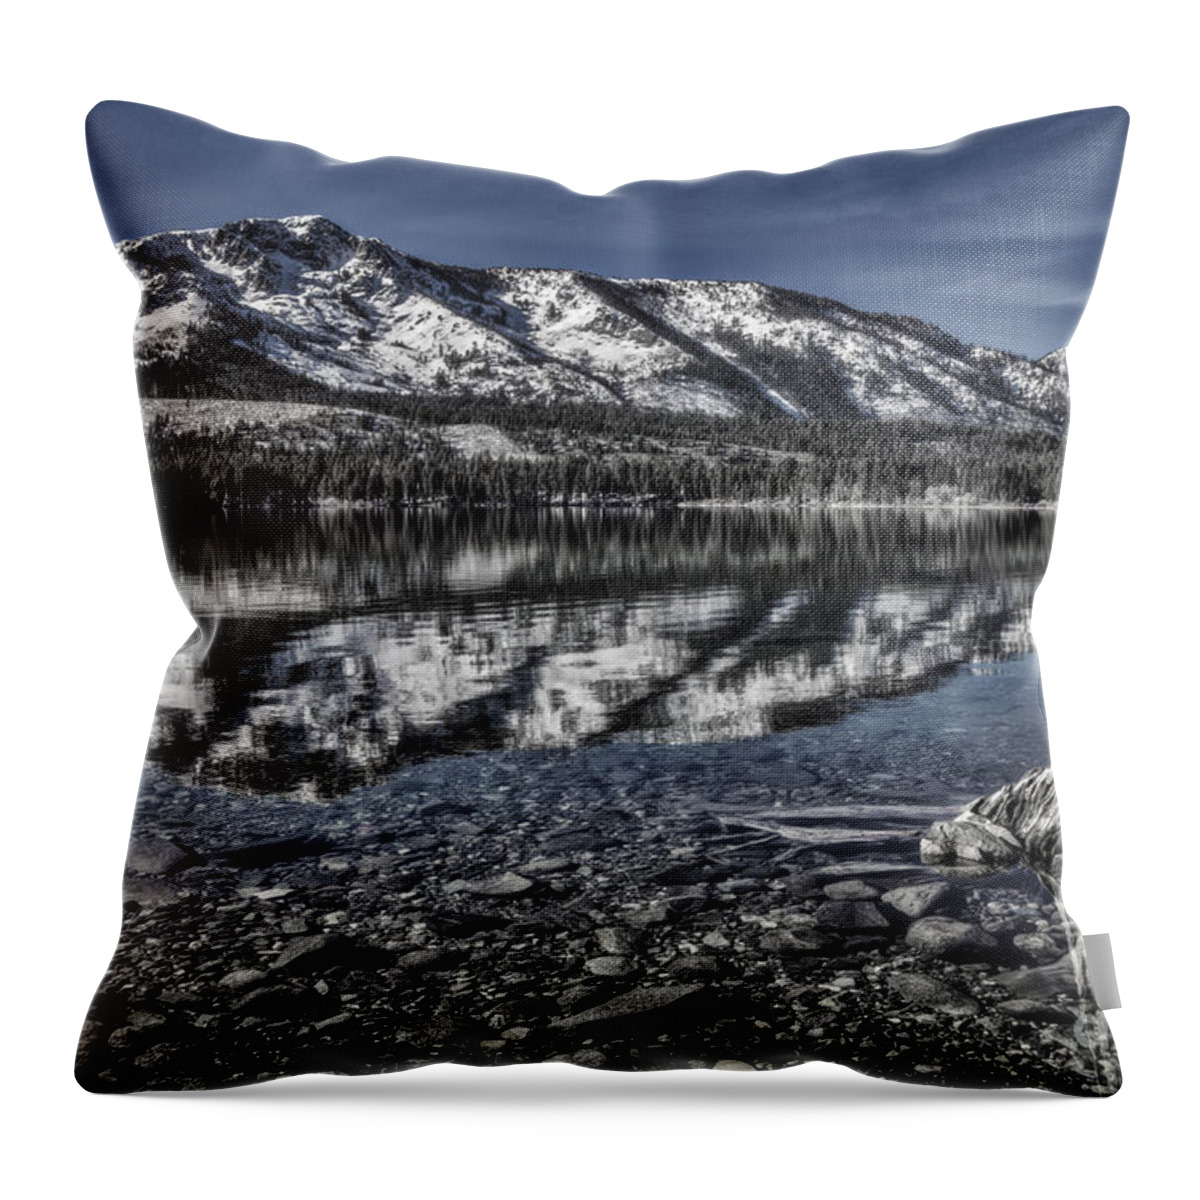 Landmarks Throw Pillow featuring the photograph The Stump And The Mountain by Mitch Shindelbower